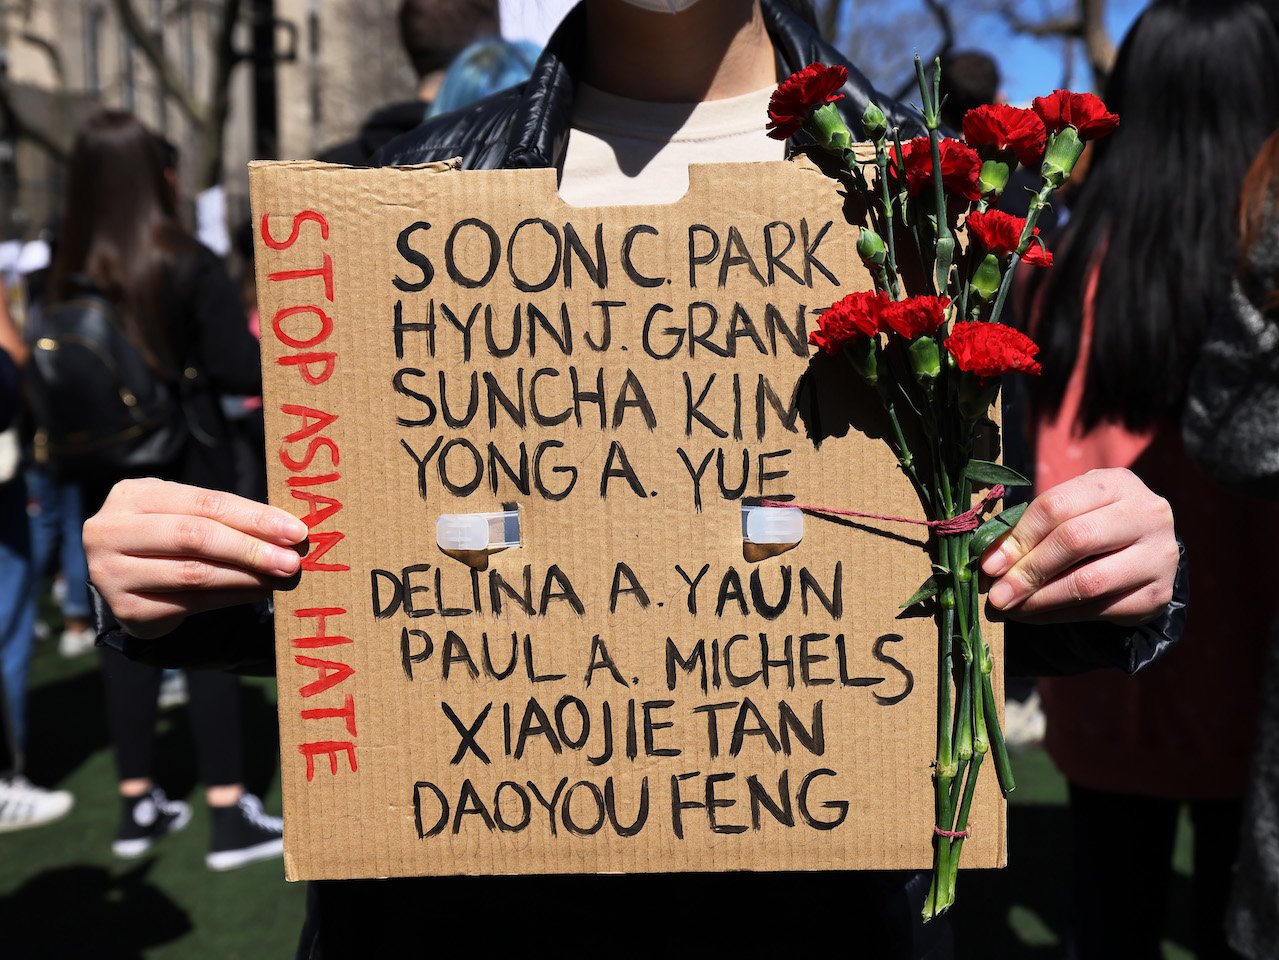 A woman holds up a sign with the names of the Atlanta shooting victims and a bunch of red flowers at a rally against hate in Columbus Park on March 21, 2021 in the Chinatown neighborhood of Manhattan in New York, New York. A rally for solidarity was organized in response to a rise in hate crimes against the Asian community since the start of the coronavirus (COVID-19) pandemic in 2020. On March 16 in Atlanta, Georgia, a man went on a shooting spree in three spas that left eight people dead